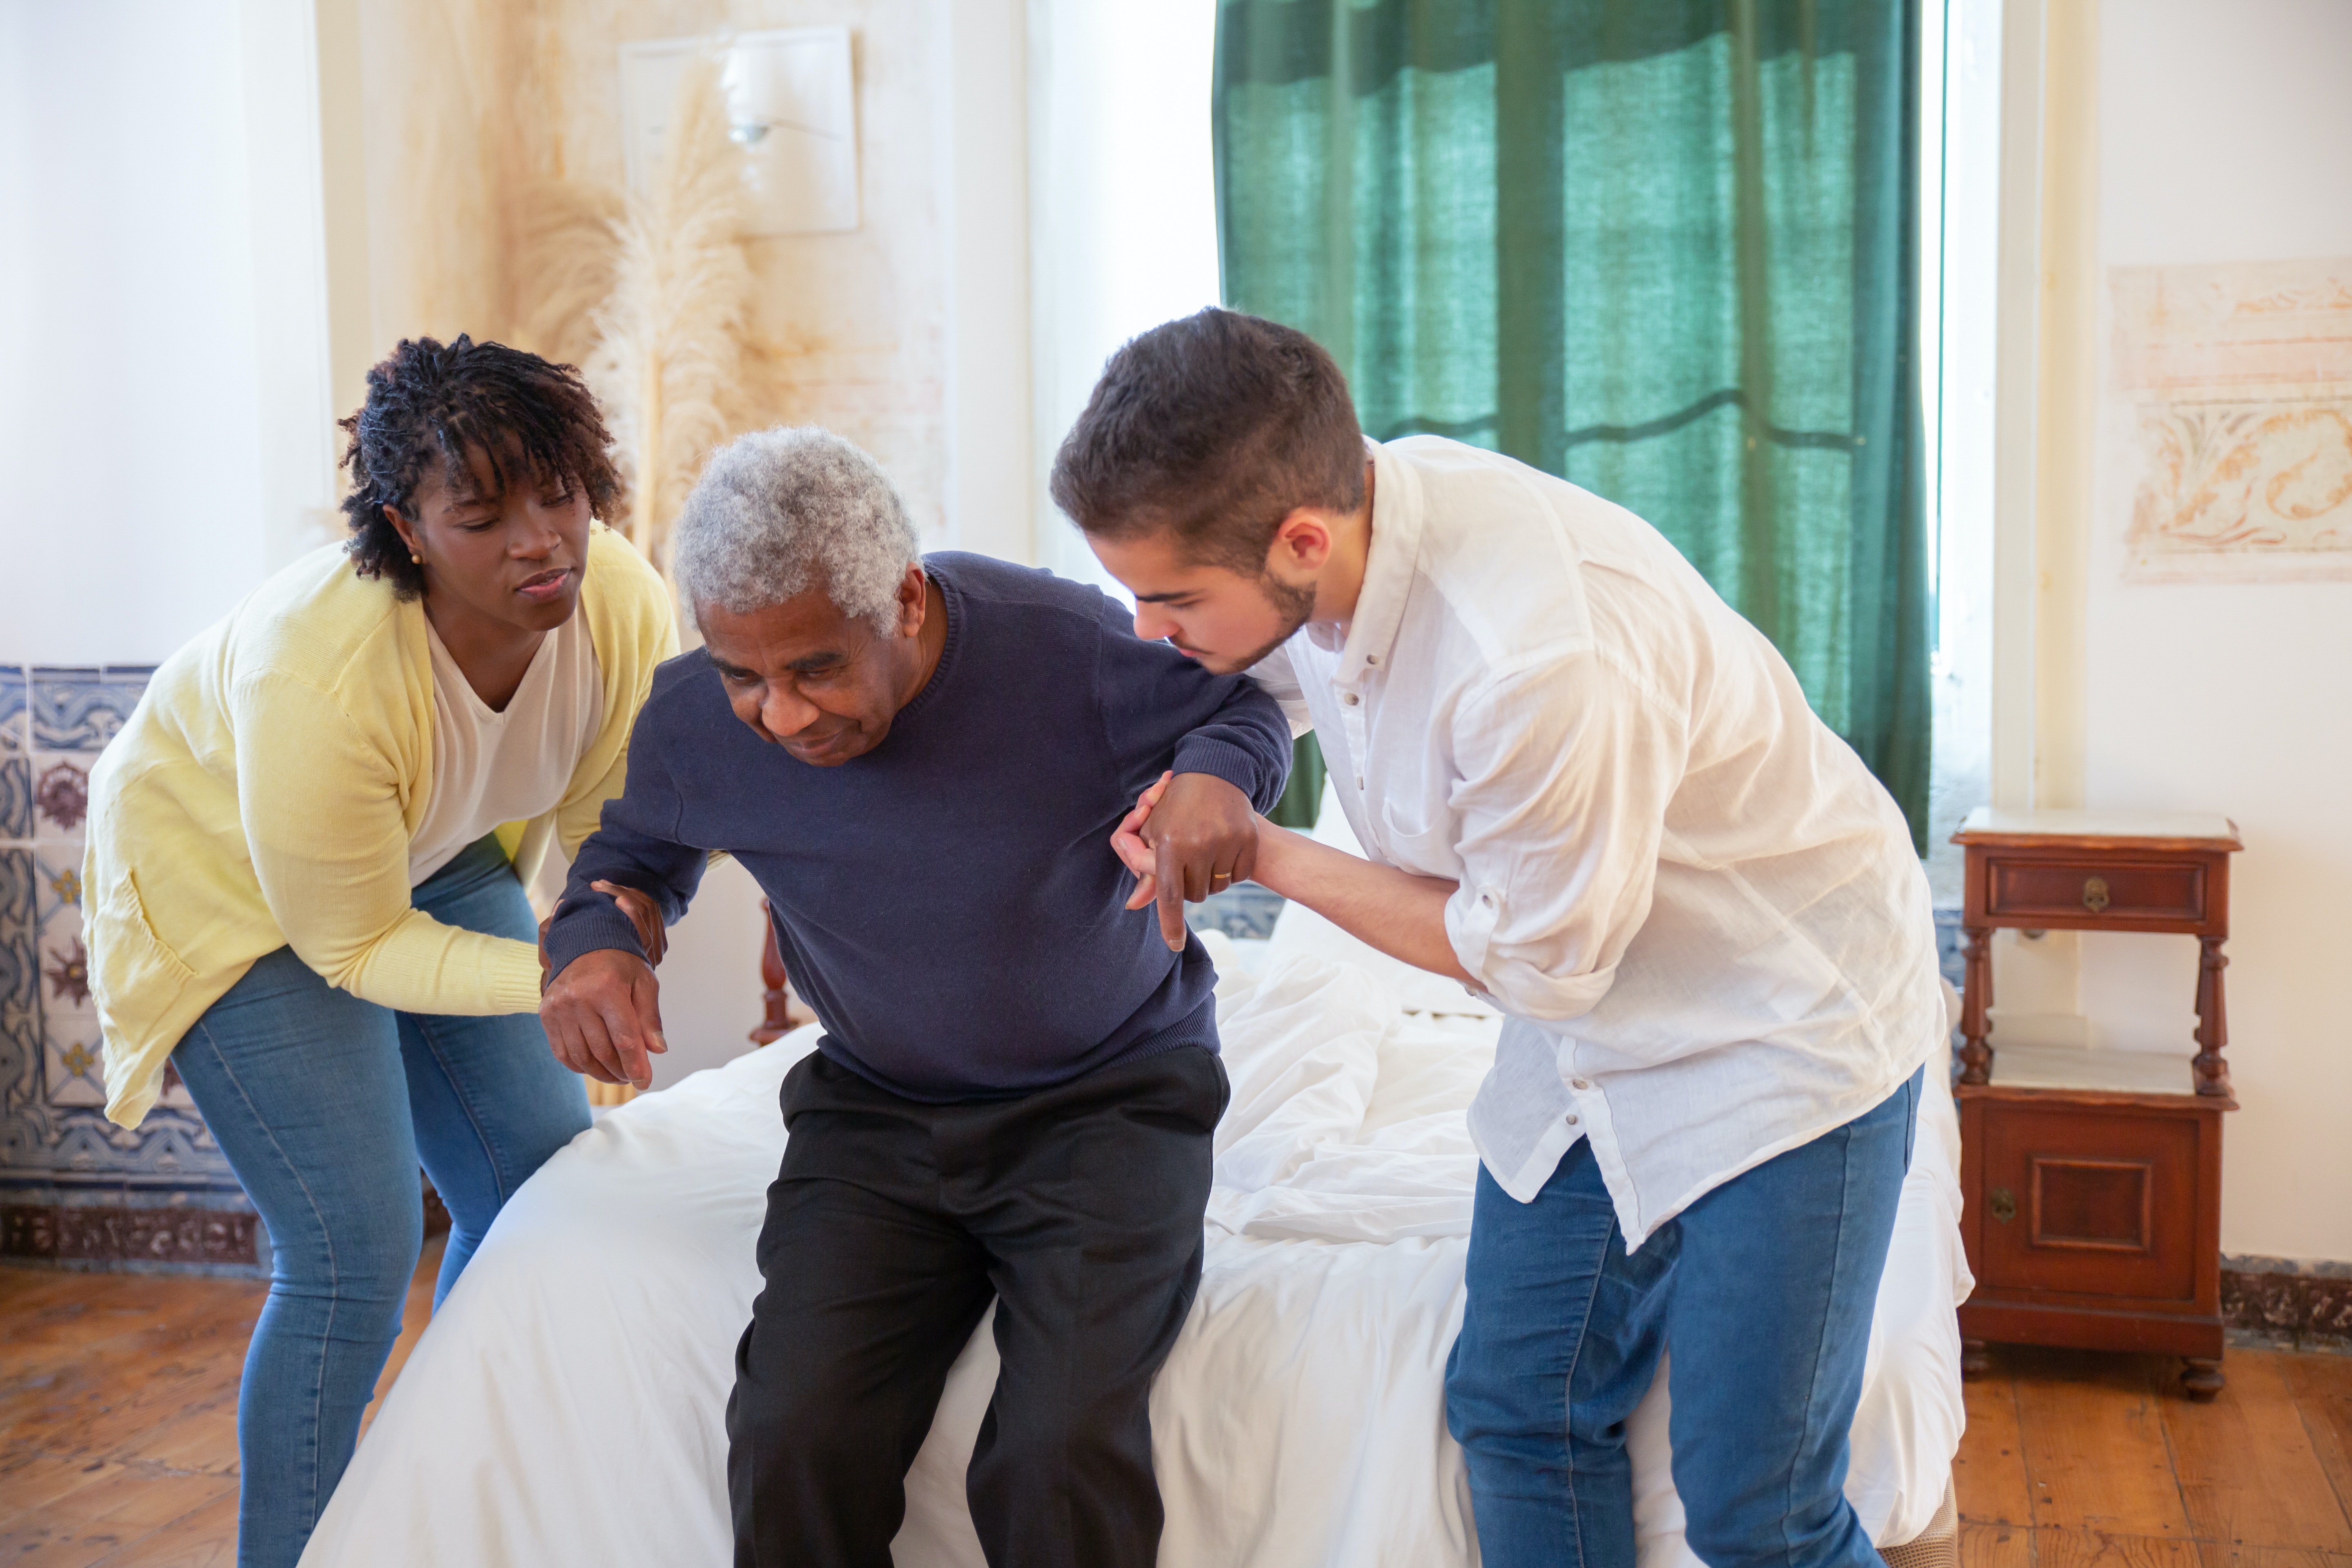 Two health care workers helping an elderly person stand up.